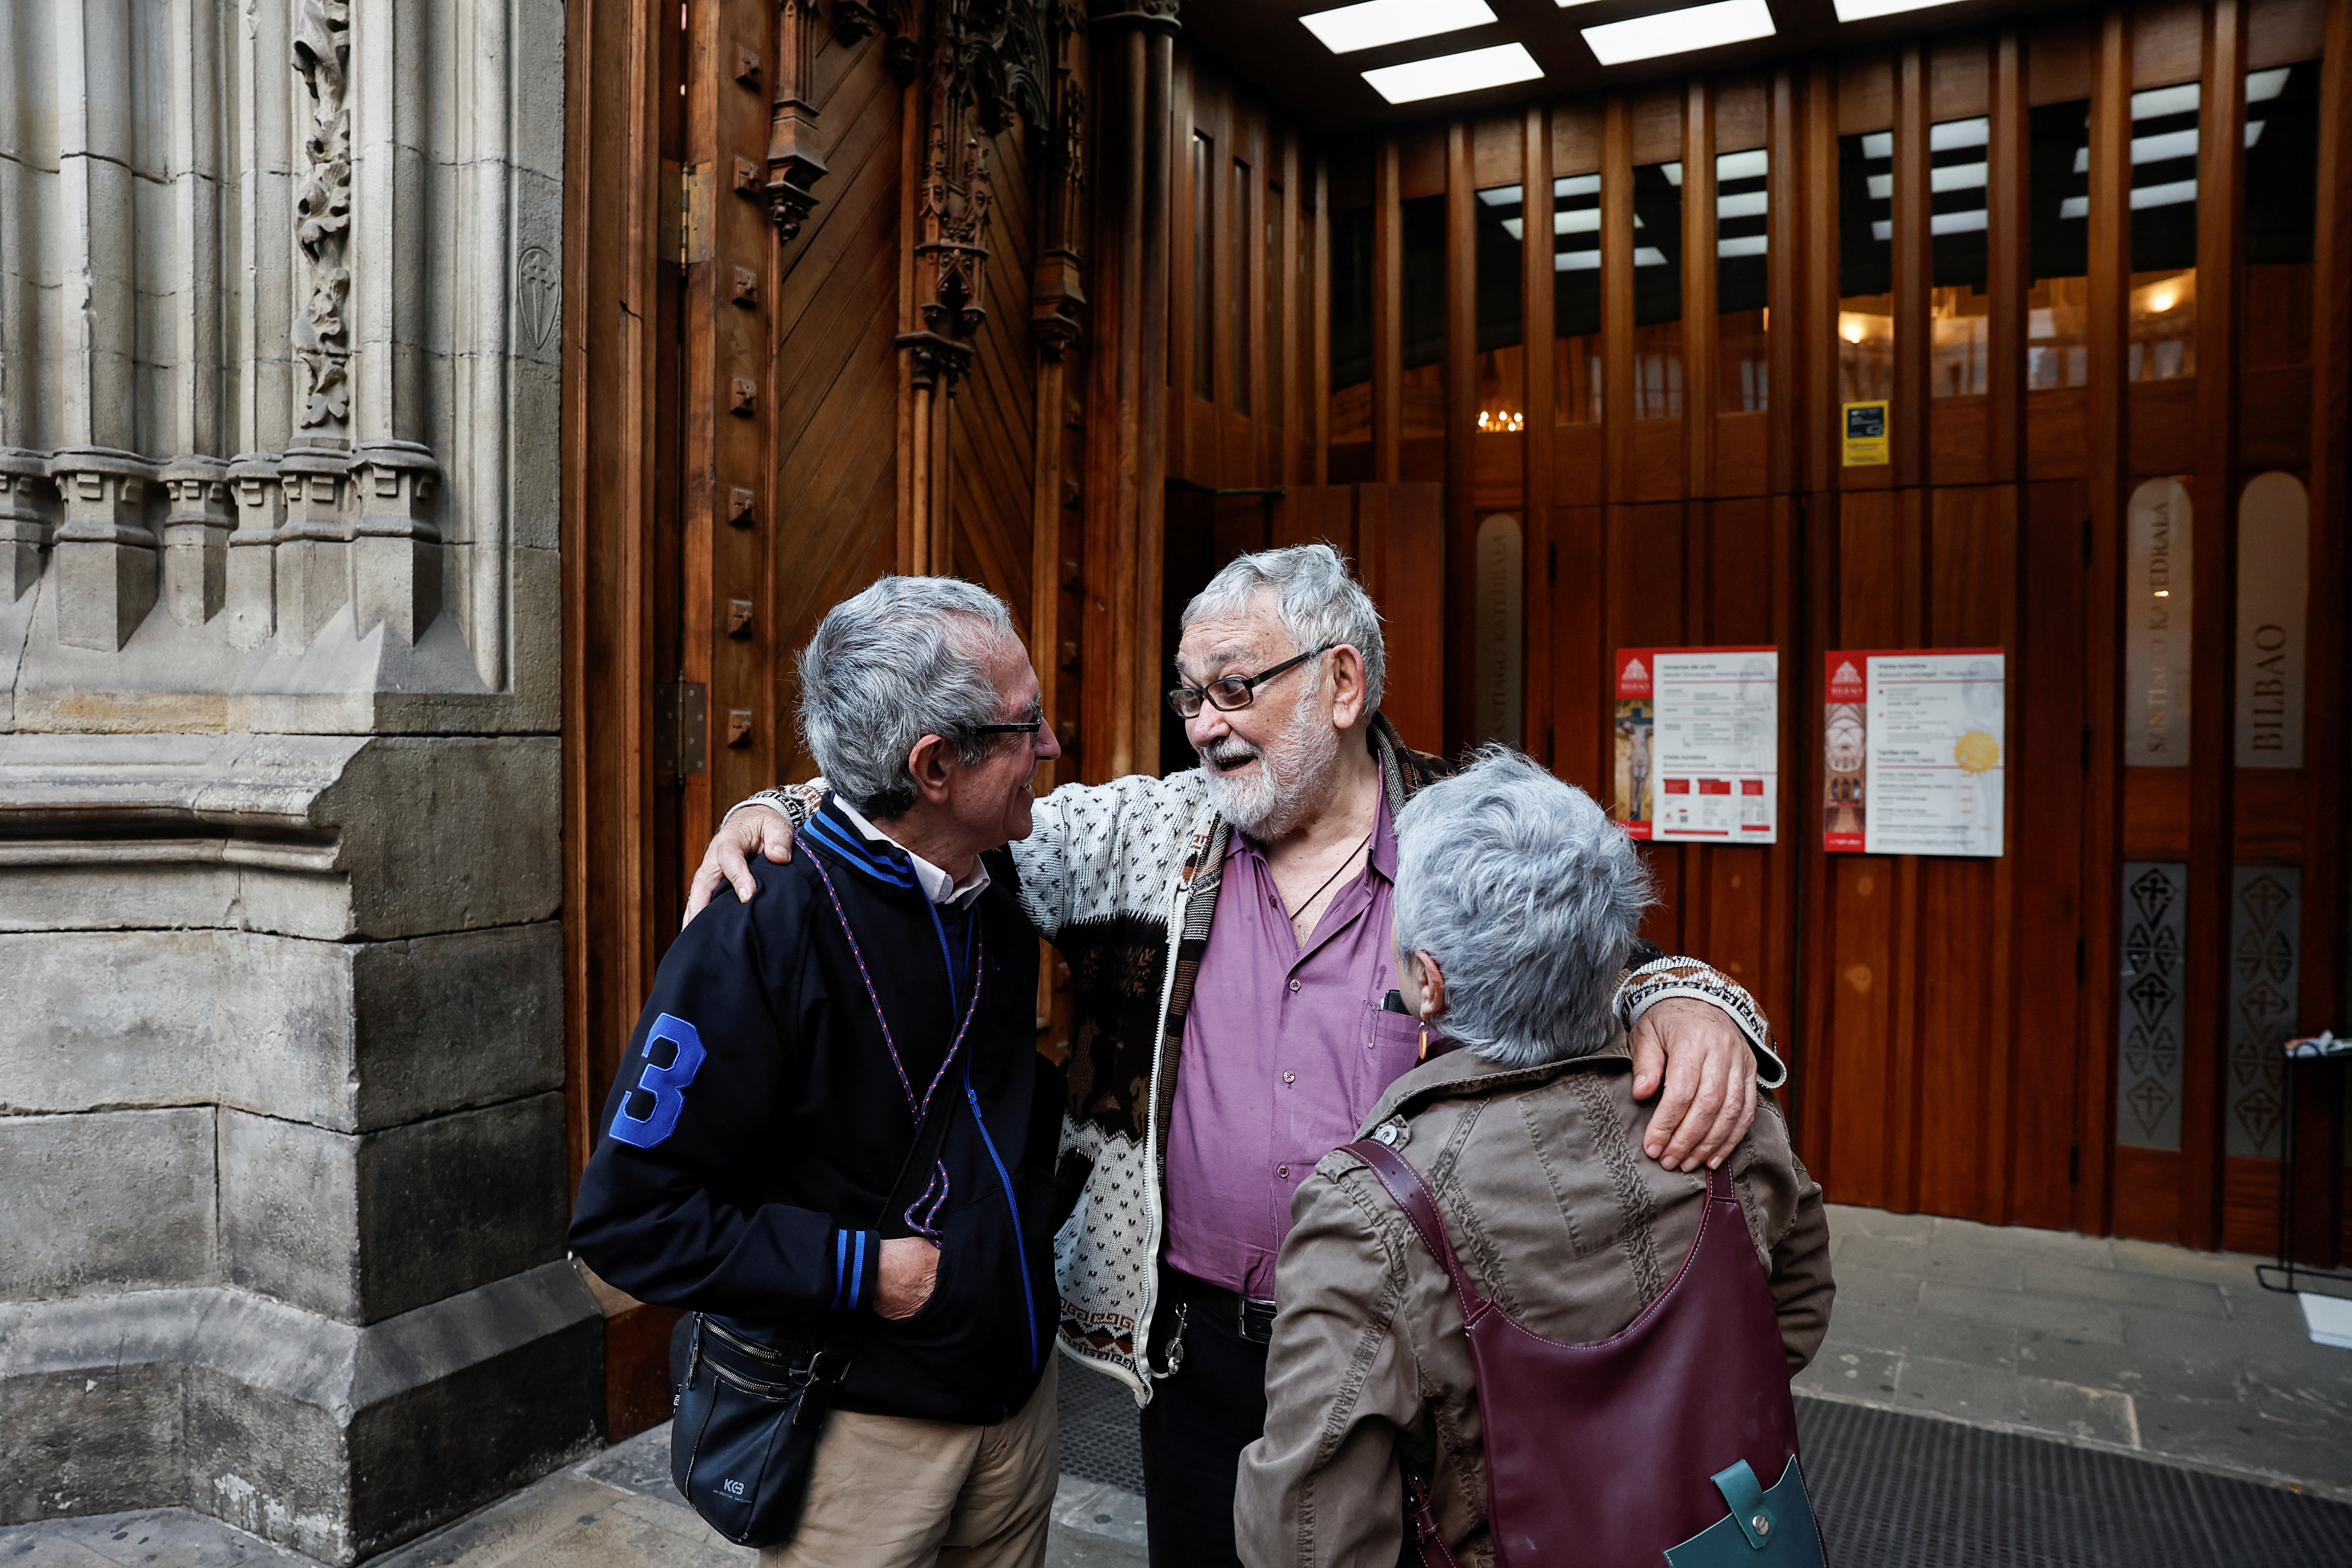 Priest Josu Lopez Villalba, sexual abuse victim, talks to people after a mass, by the Bishop of Bilbao, Joseba Segura and priest Villalba, where forgiveness was asked for from victims of sexual abuse by the Catholic Church, in Bilbao